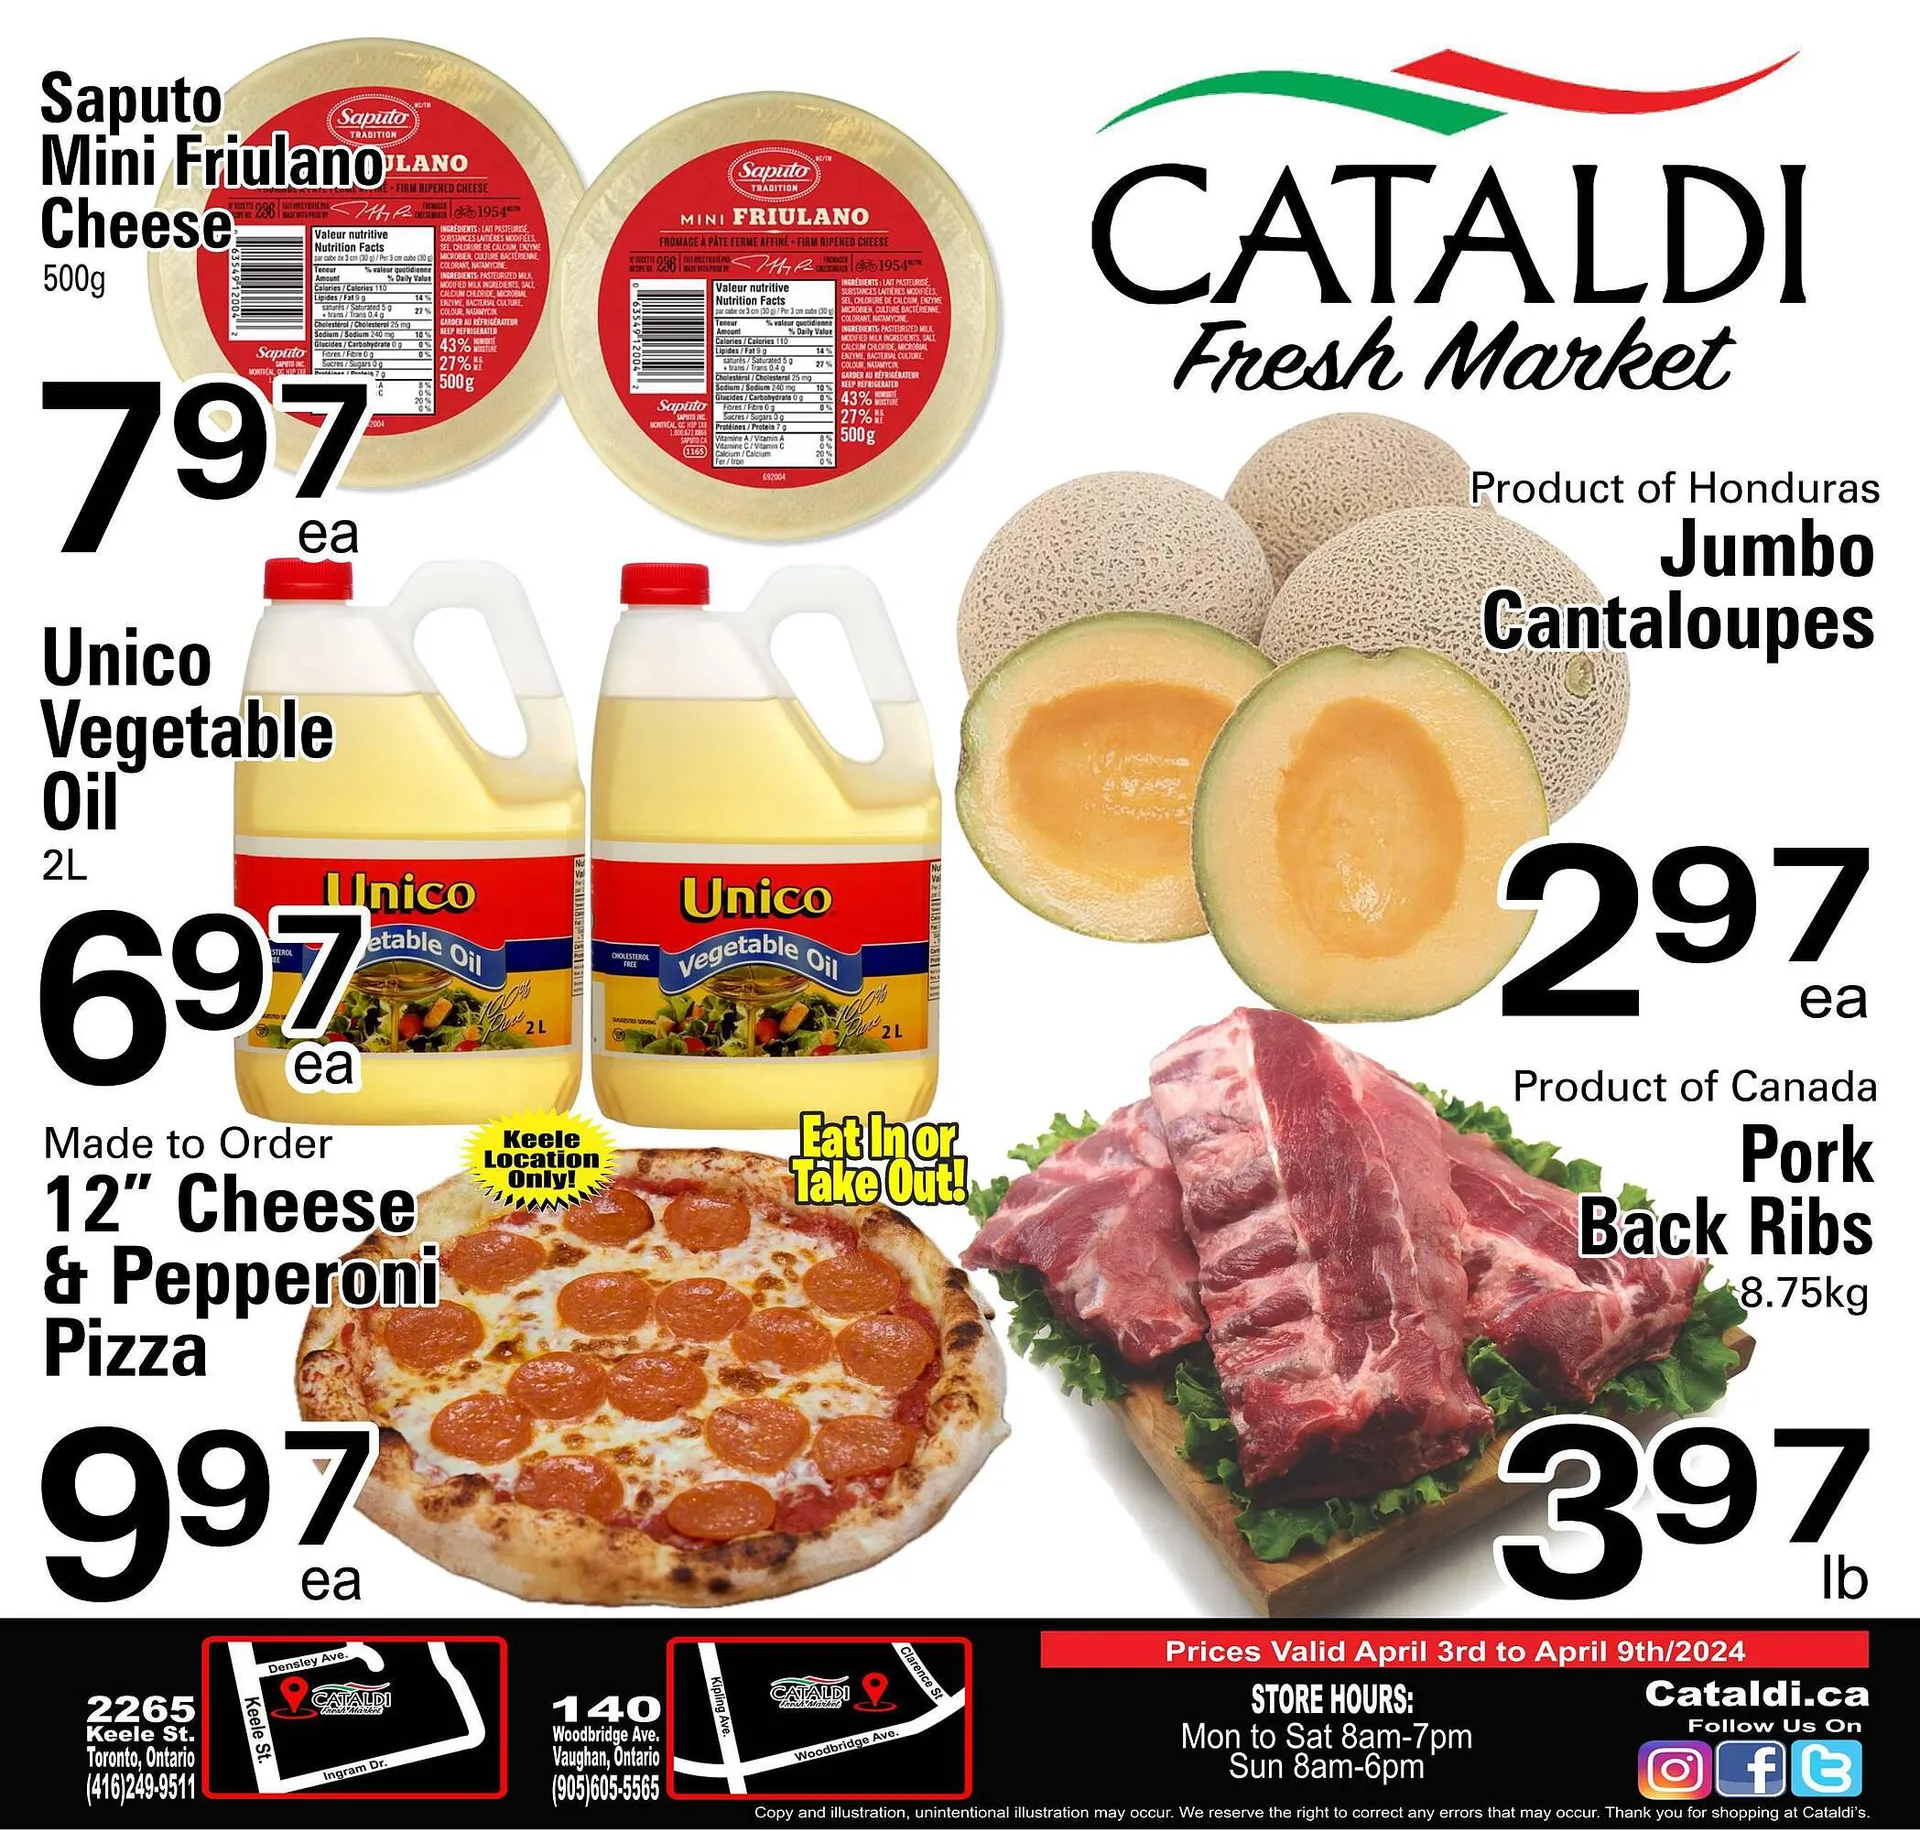 Cataldi Fresh Market flyer from April 3 to April 9 2024 - flyer page 1